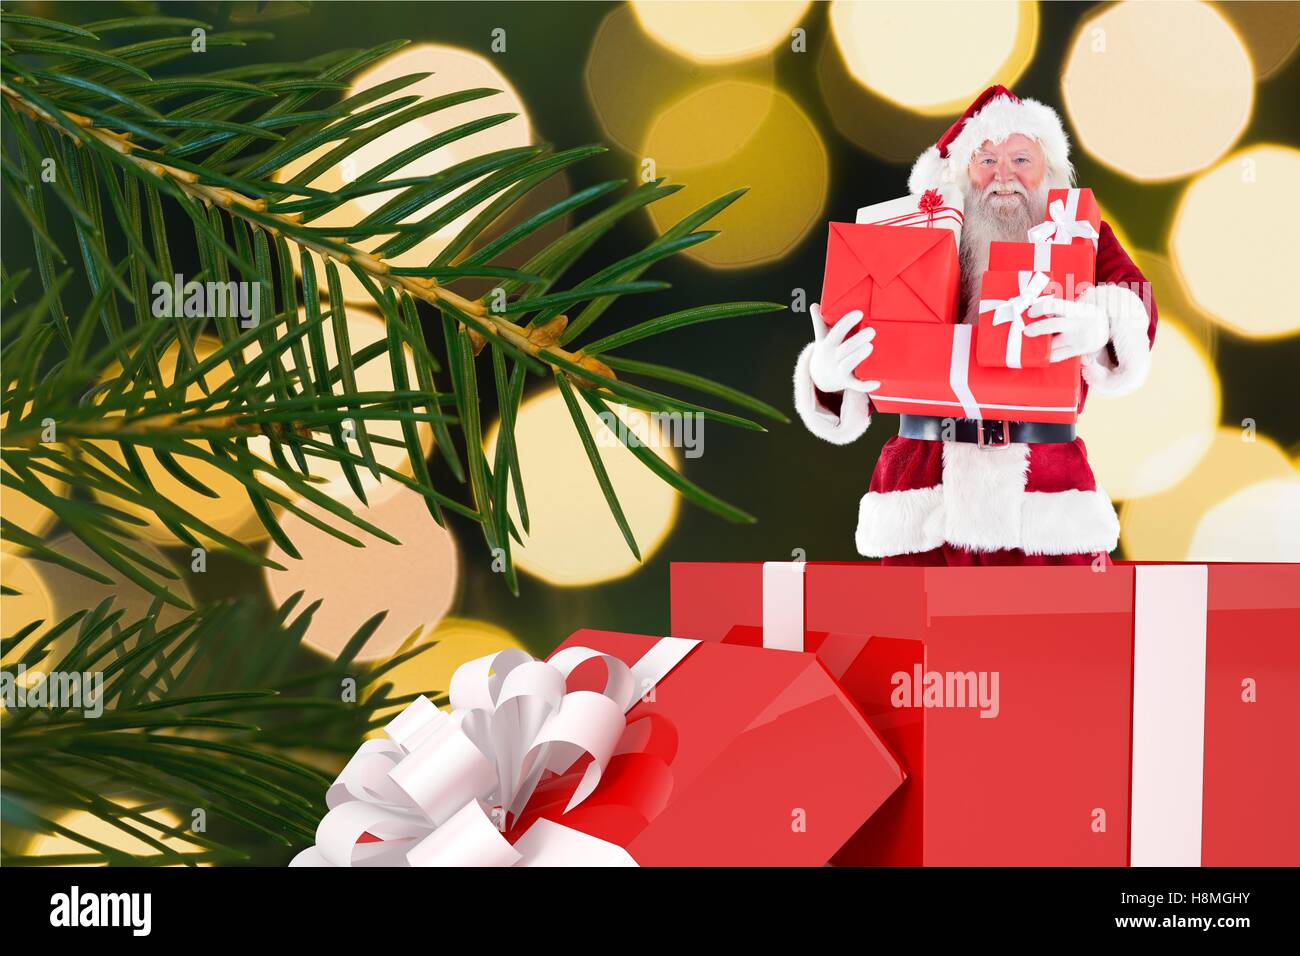 Santa claus figurine with christmas gifts Stock Photo